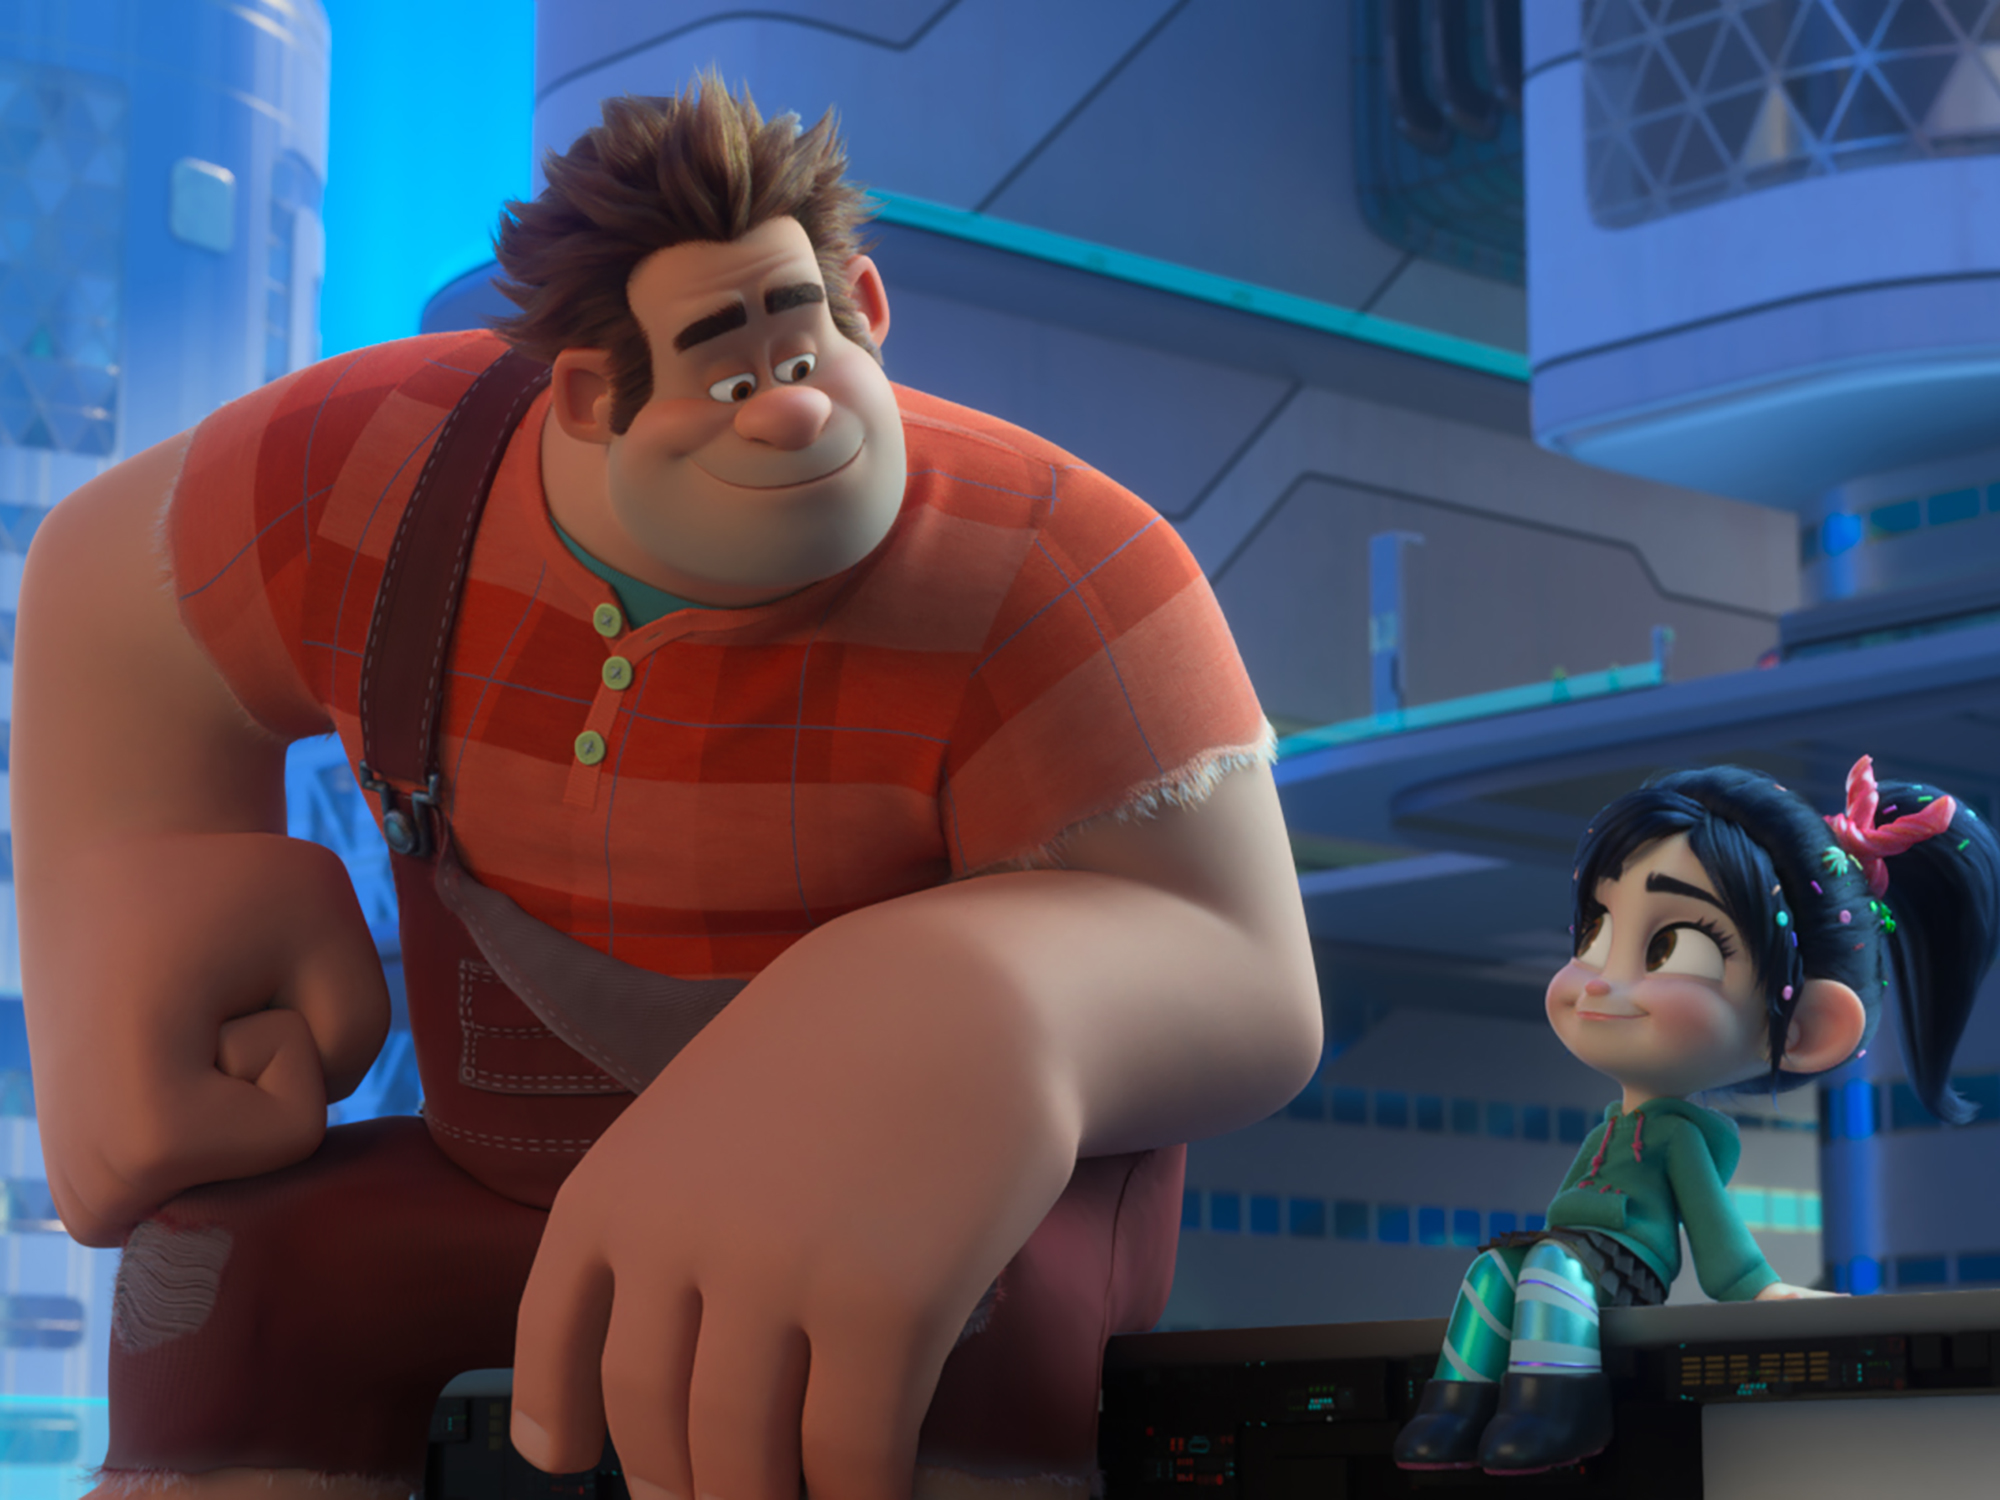 Ralph Breaks the Internet review - Smells like cold, hard, cynical cash.